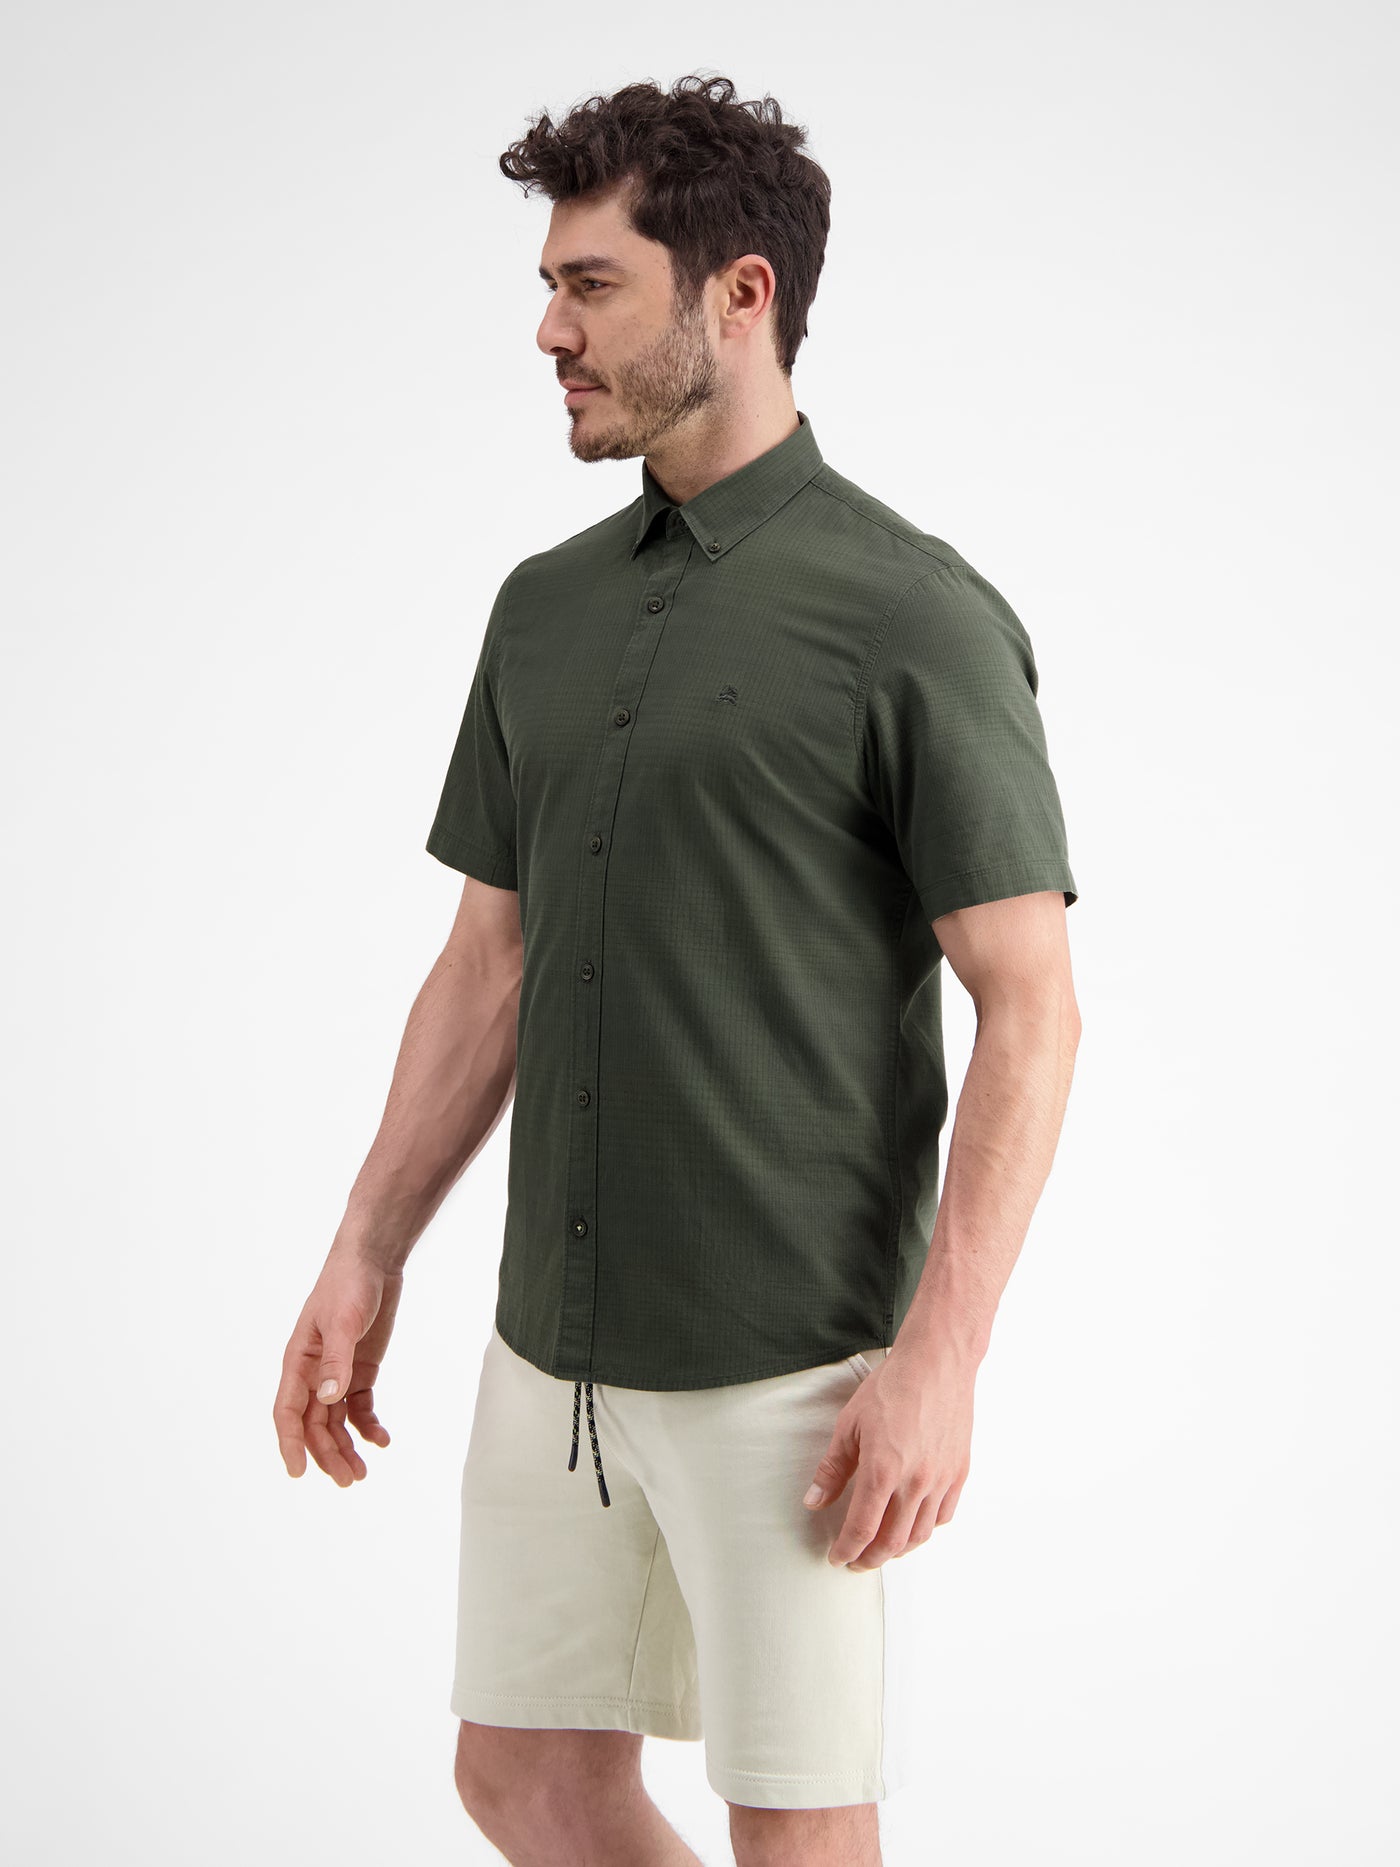 Short-sleeved shirt in structured check quality